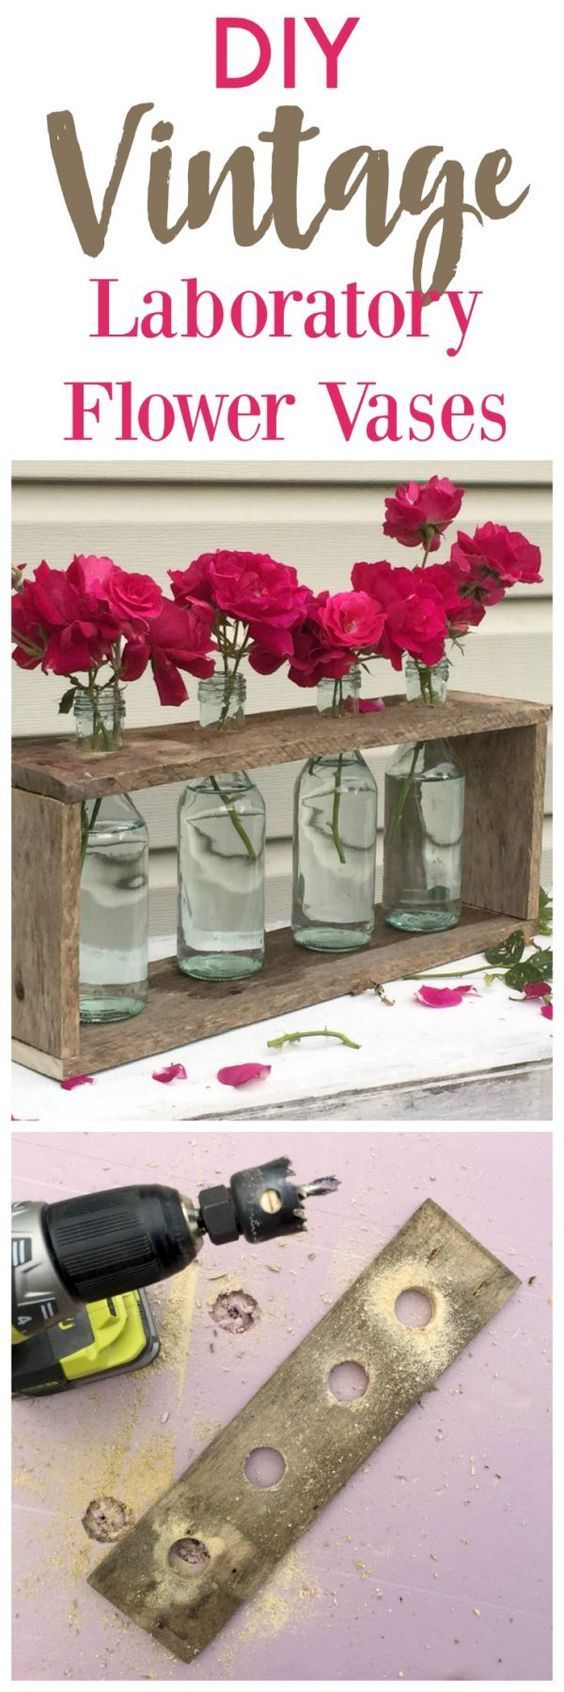 DIY Laboratory Flower Vases | Make this new but vintage looking table top center...